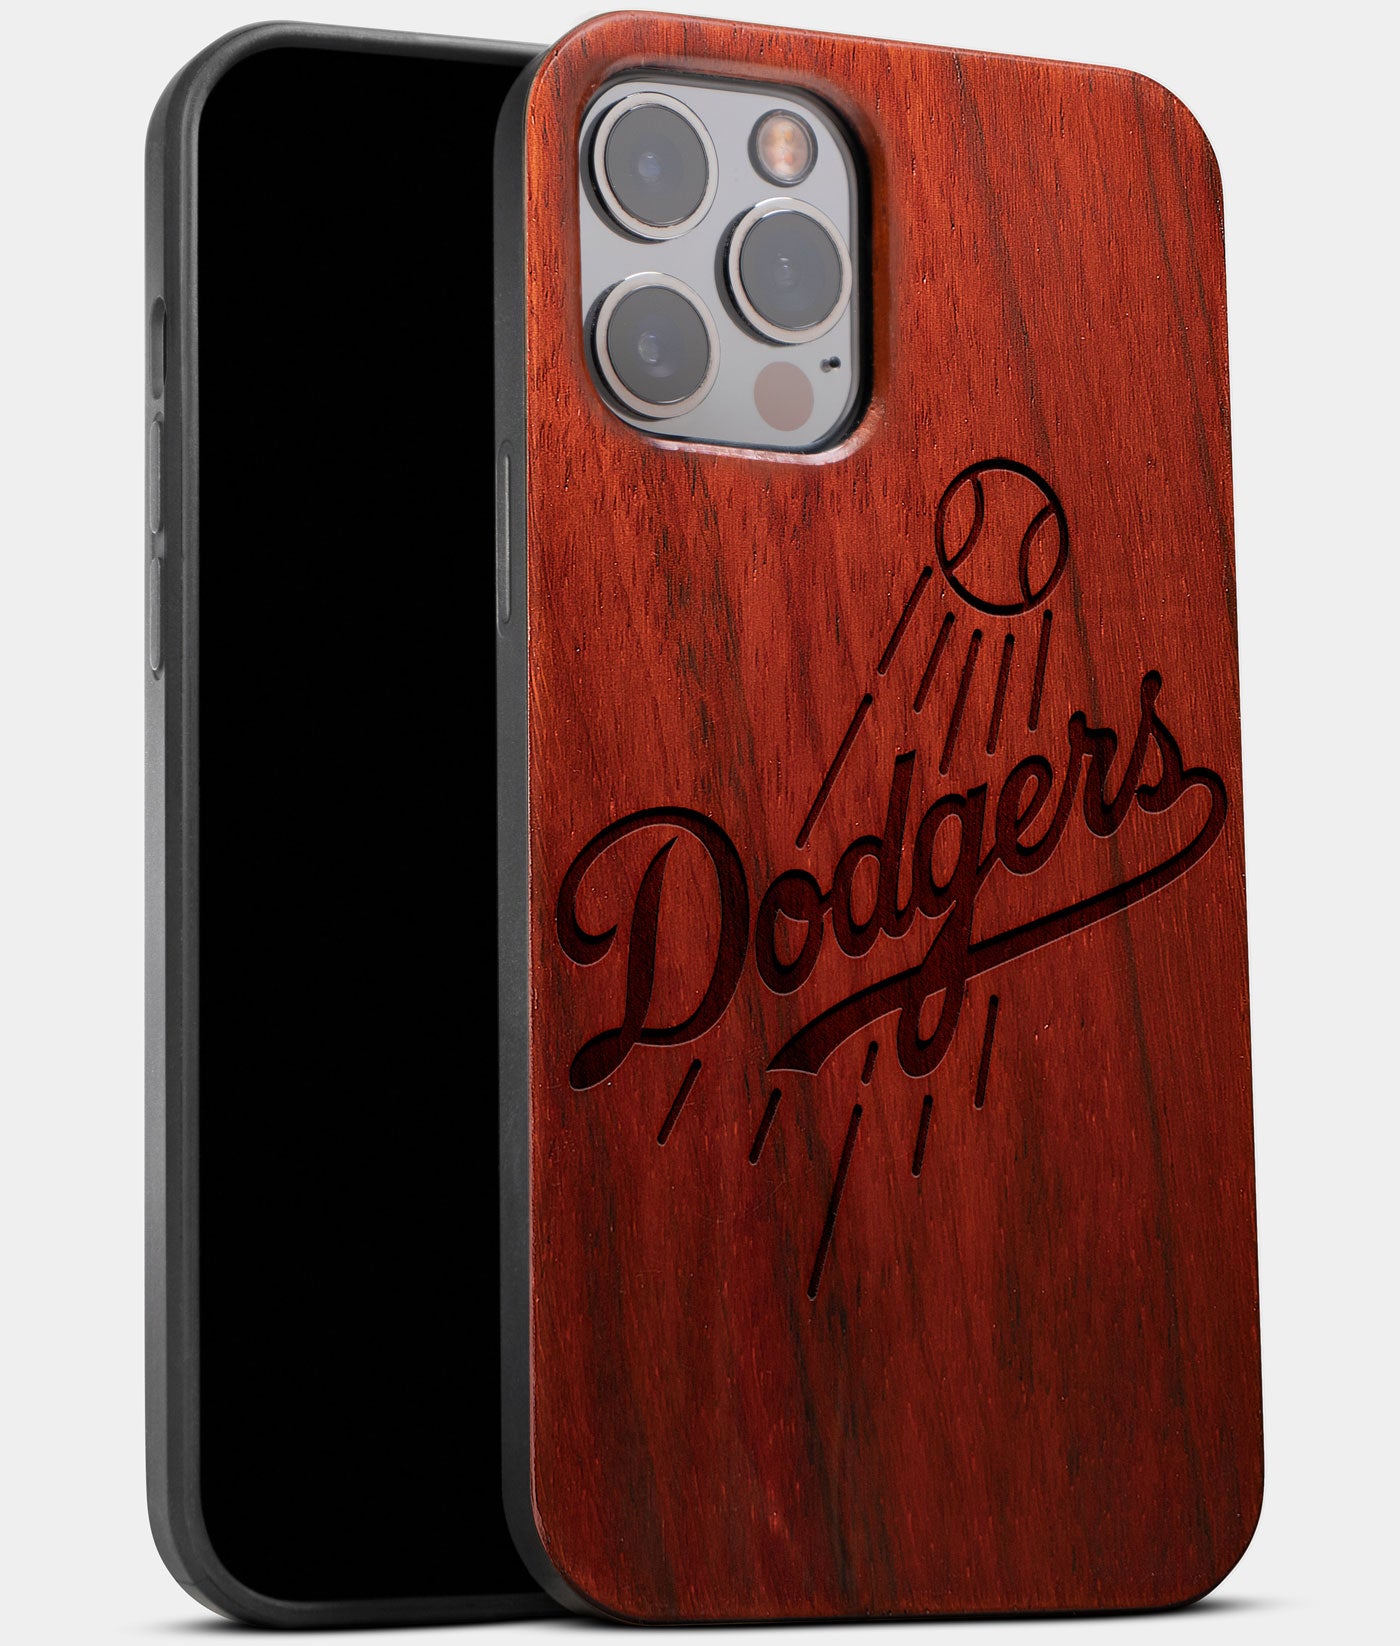 Best Wood Los Angeles Dodgers iPhone 13 Pro Max Case | CustomClassic LA Dodgers Gift | Mahogany Wood Cover - Engraved In Nature